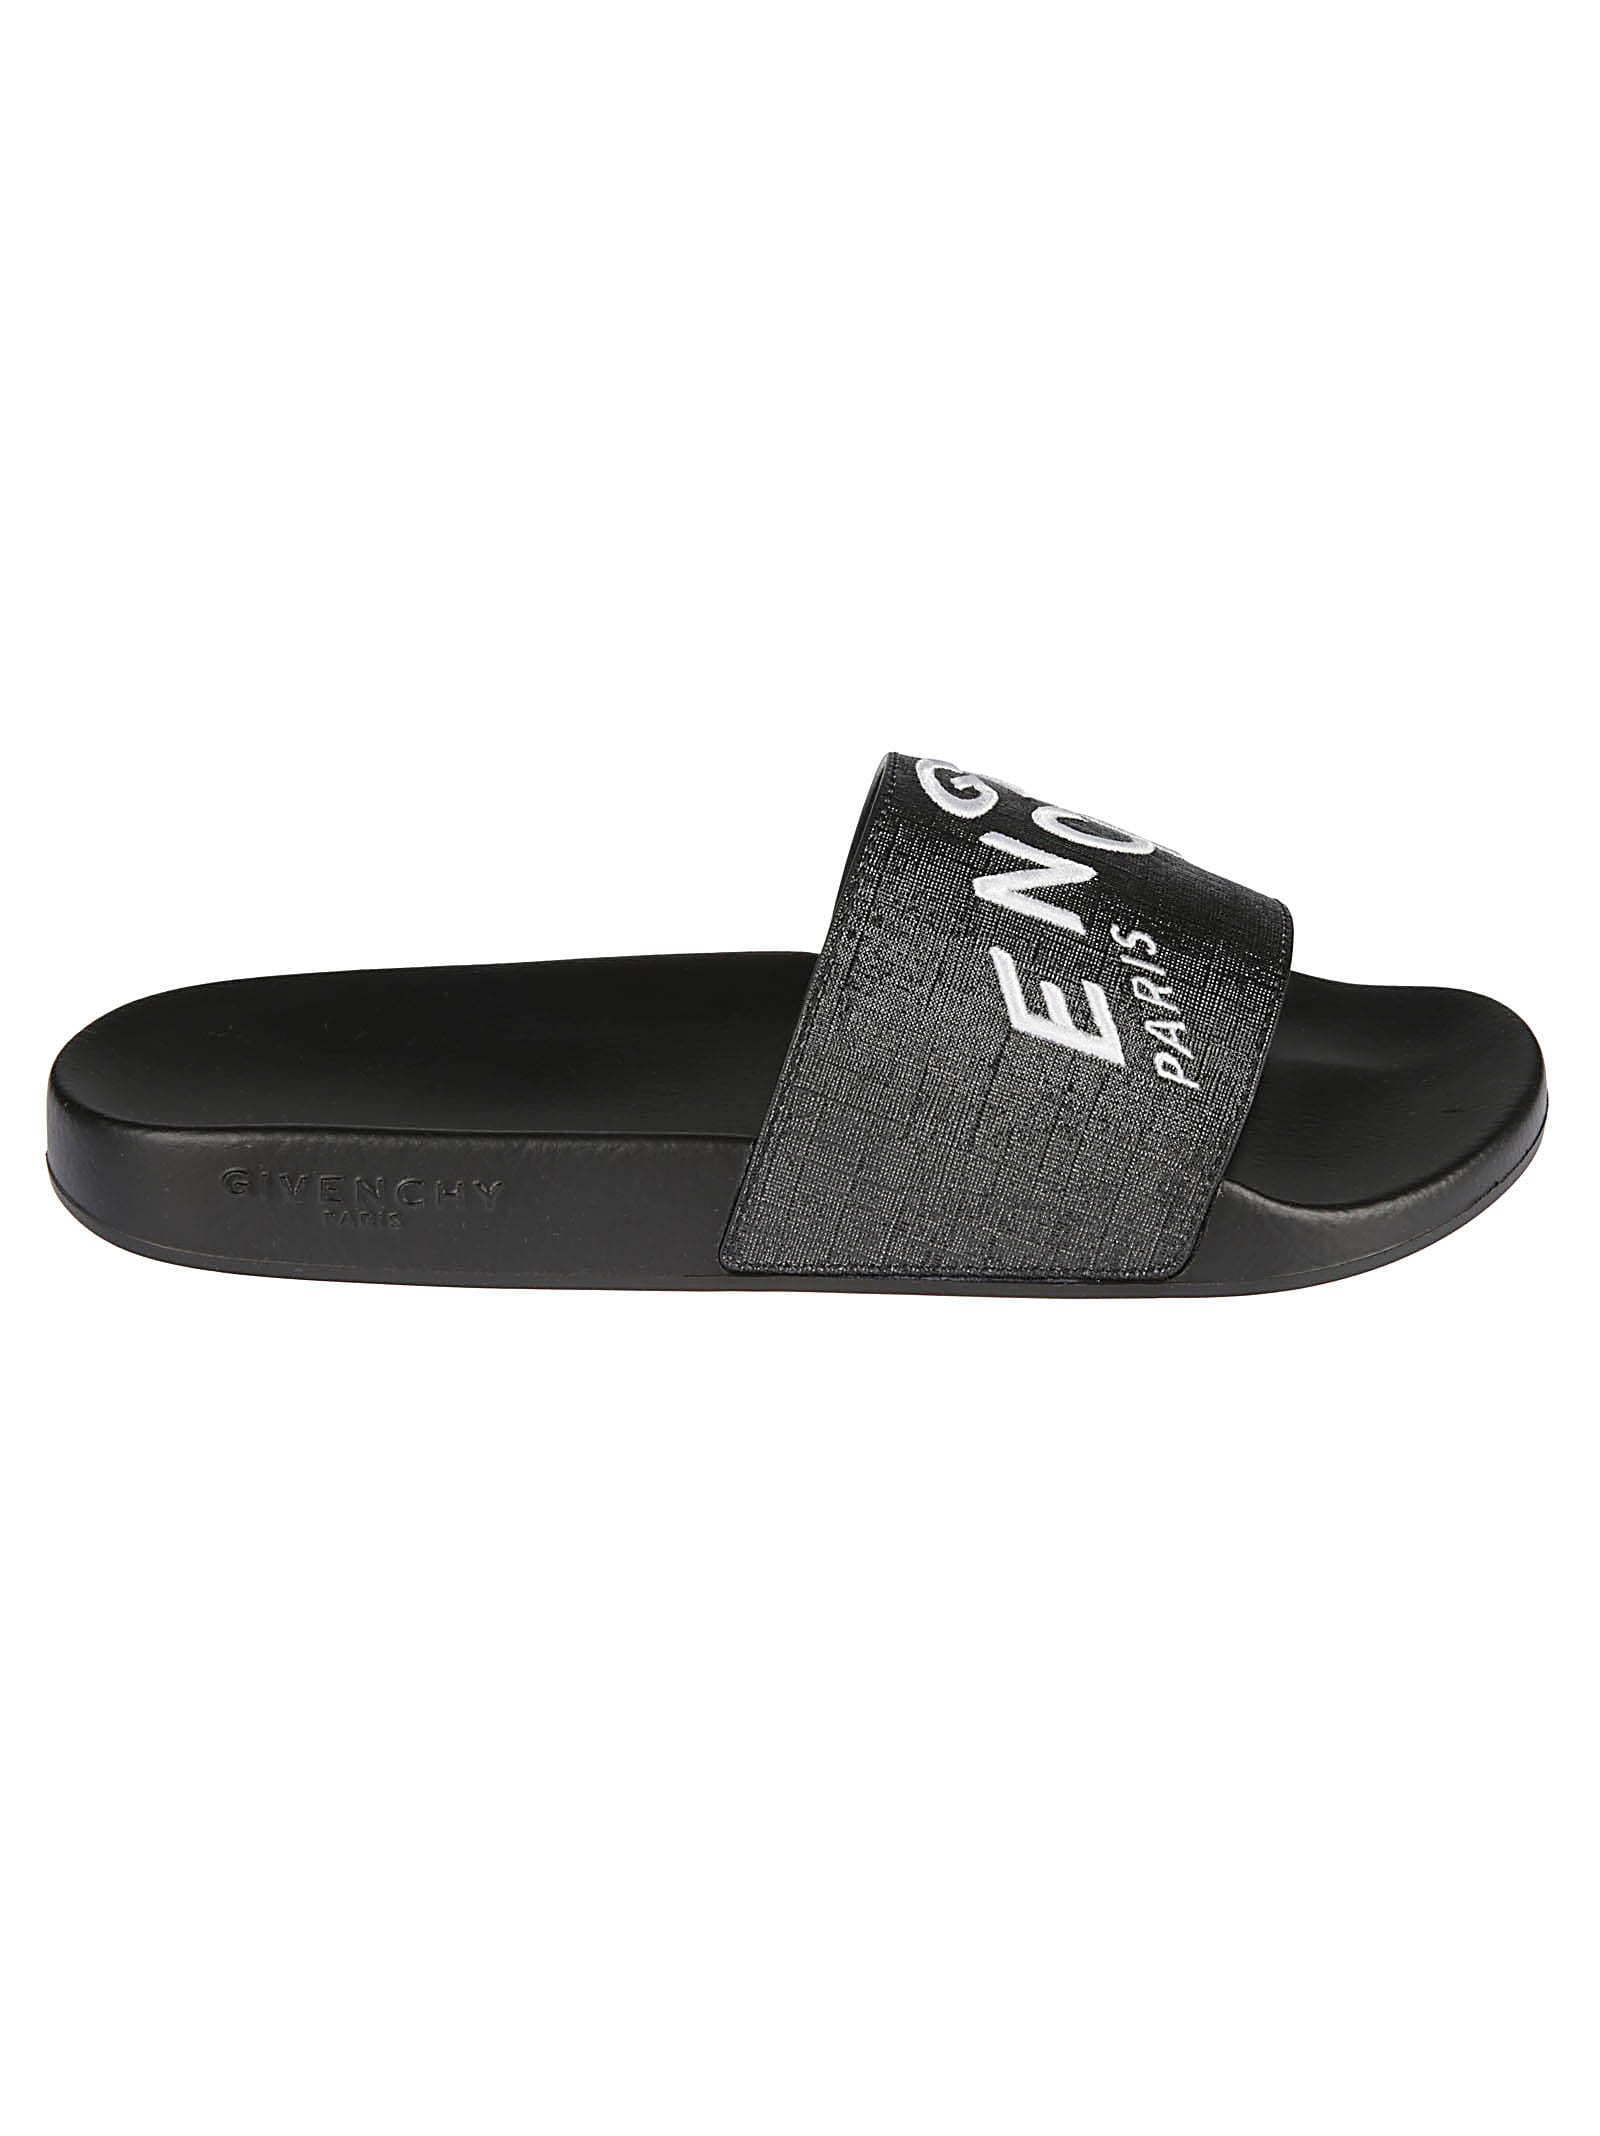 GIVENCHY LOGO EMBROIDERED SLIDERS,11689509